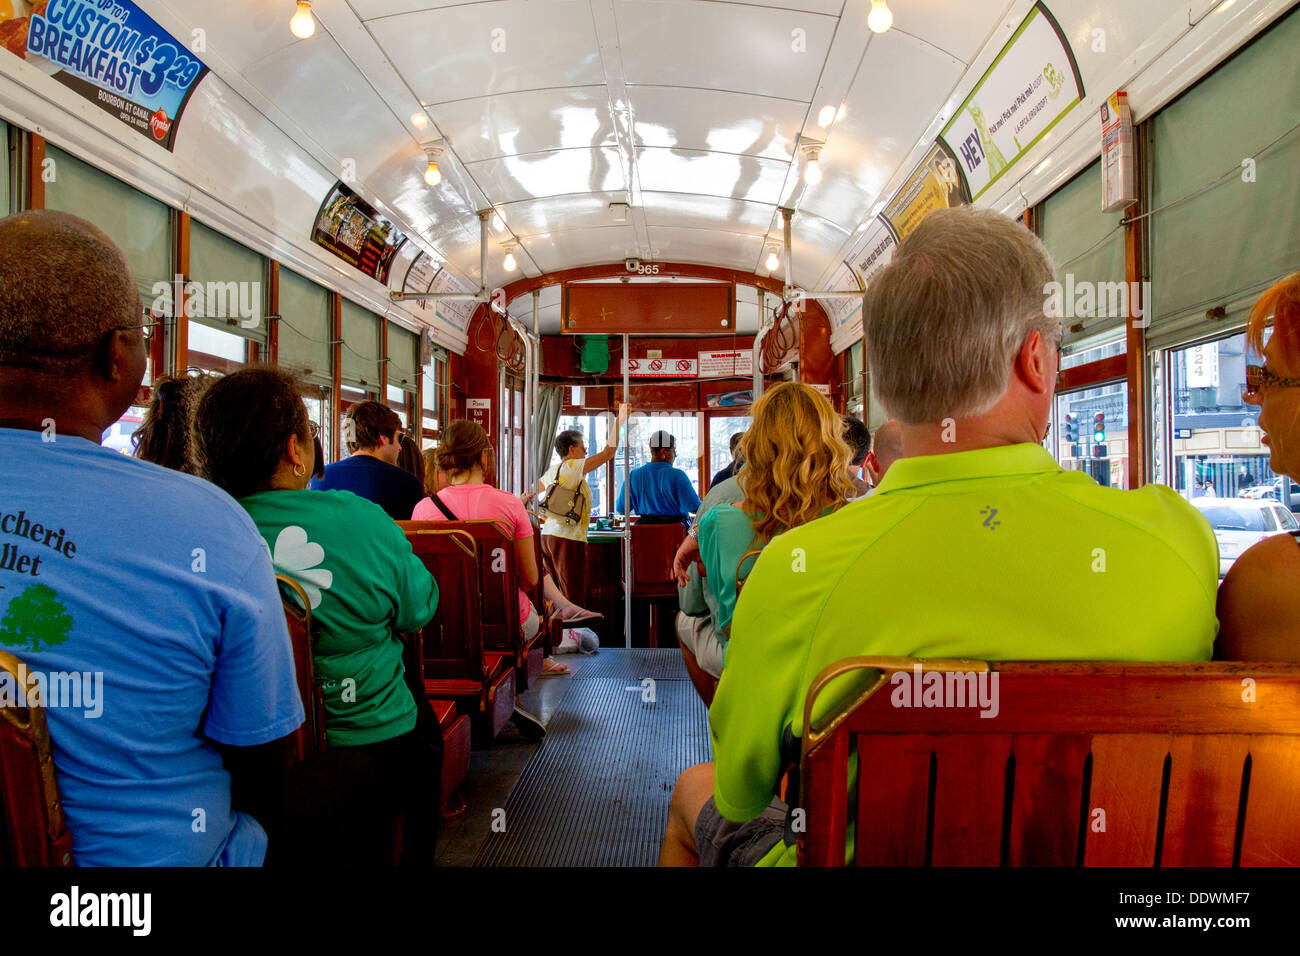 New Orleans streetcar, New Orleans, LA, USA Stock Photo